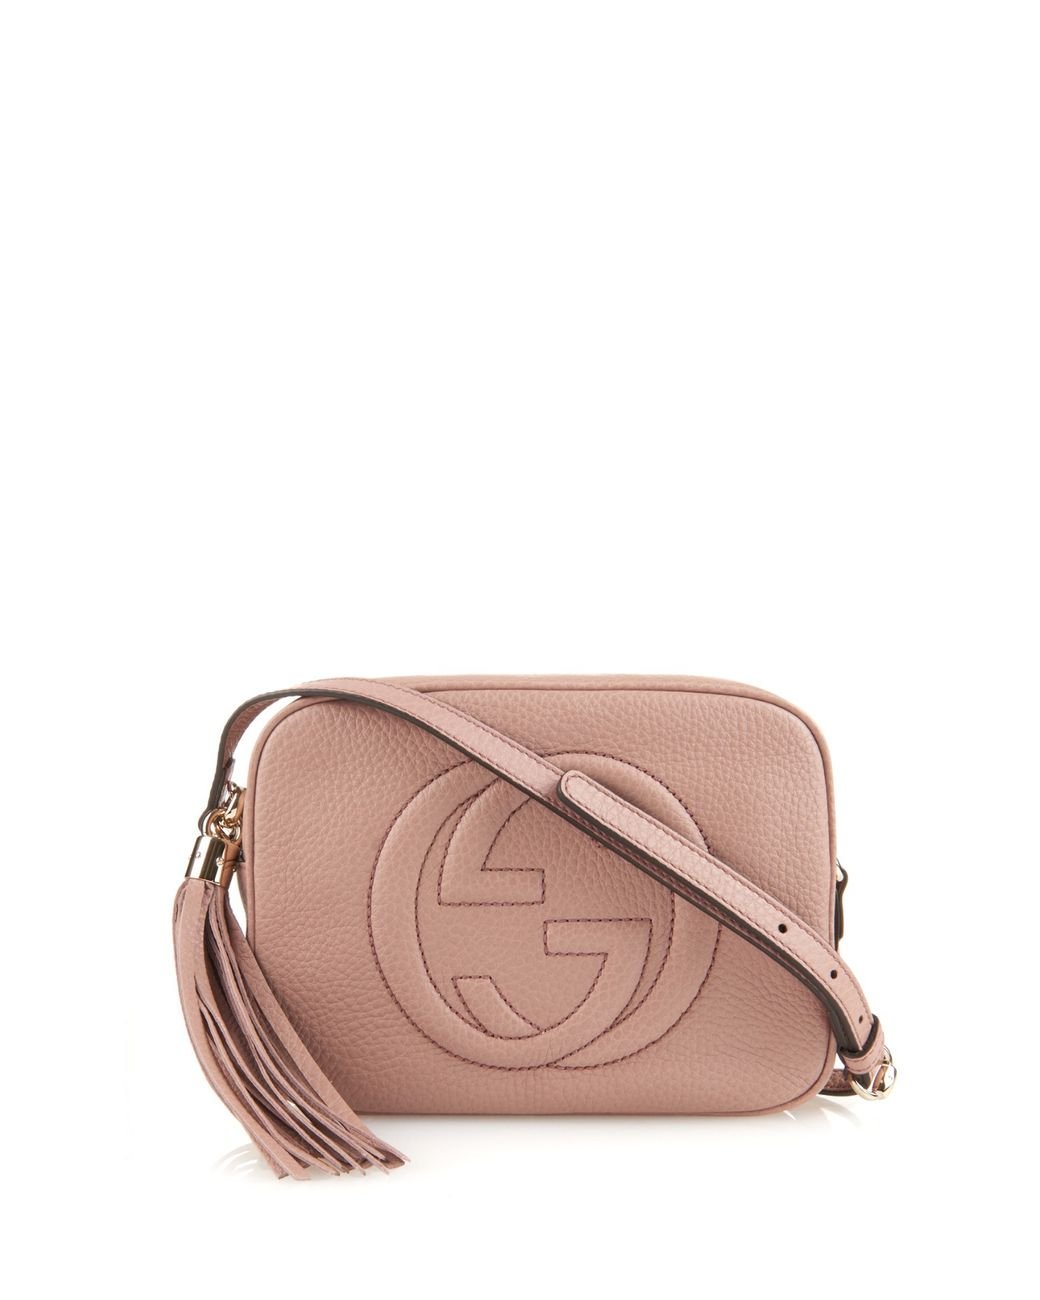 Gucci Soho Leather Cross-Body Bag in Pink |